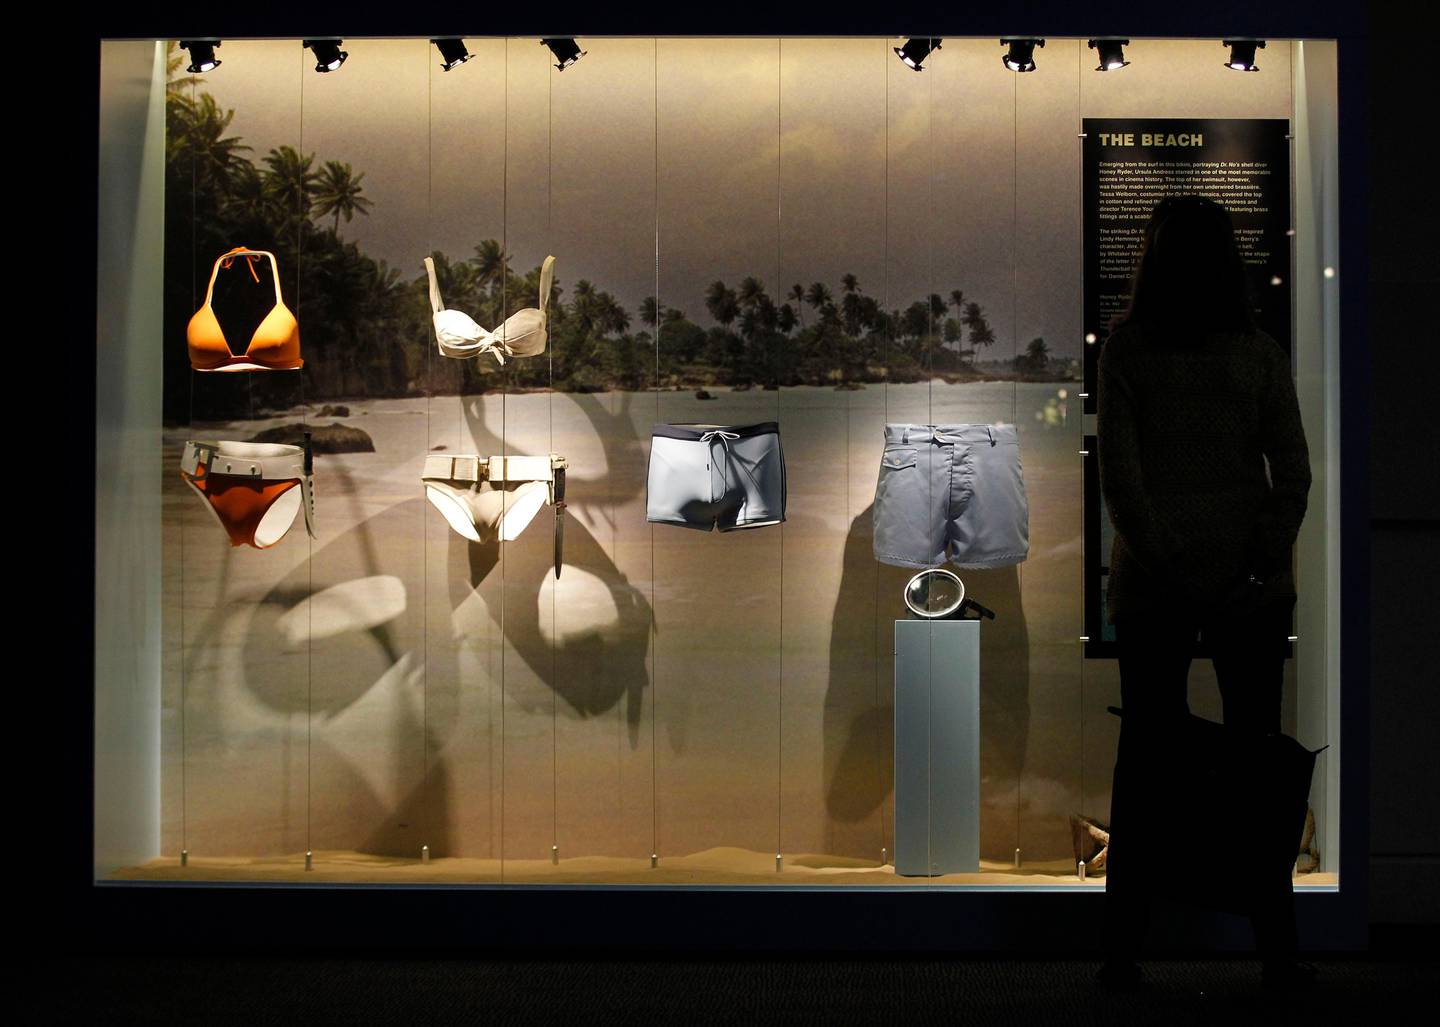 A visitor looks at a display showing, from left, an orange bikini worn by Jinx, by actress Halle Berry, in the film 'Die Another Day', a white bikini worn by Honey Ryder by actress Ursula Andress in film Dr No, James Bond's, actor Daniel Craig swimming trunk in film 'Casino Royale' and James Bond's, actor Sean Connery beach shorts in the film 'Thunderball' in the exhibition 'Designing 007 - Fifty Years of Bond Style' at the Barbican centre in London, Thursday, July 5, 2012. (AP Photo/Sang Tan)